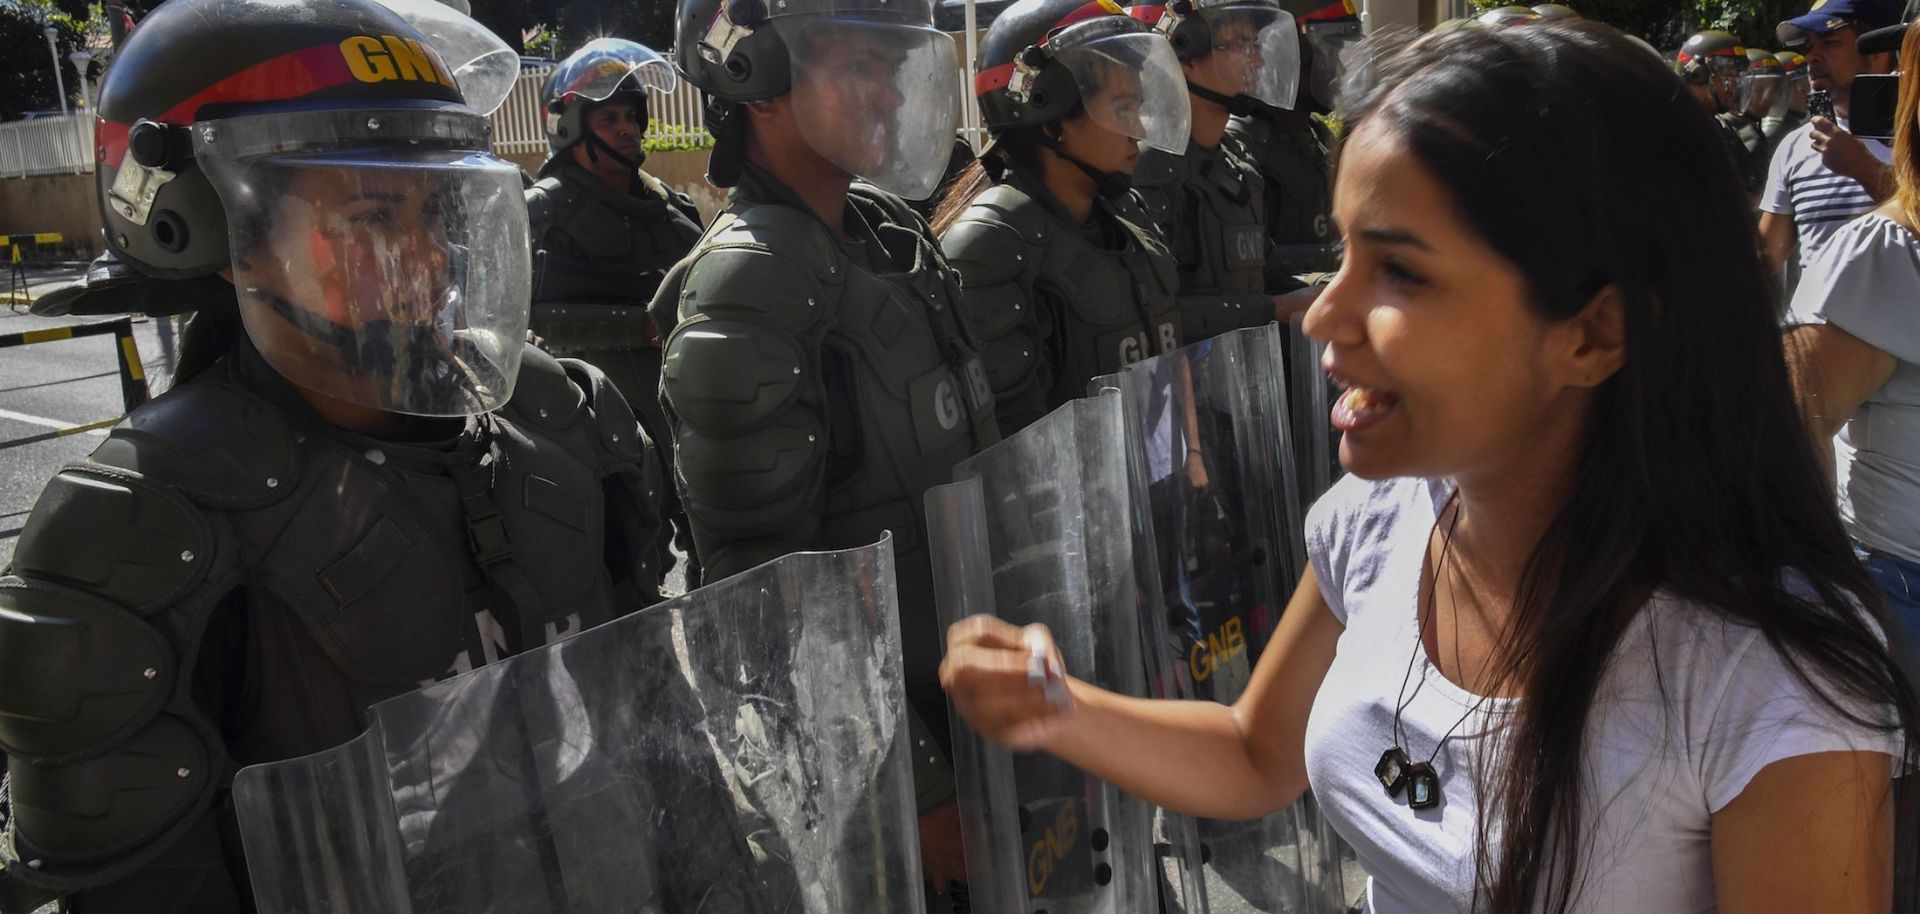 Members of the Bolivarian National Guard stand guard in Caracas